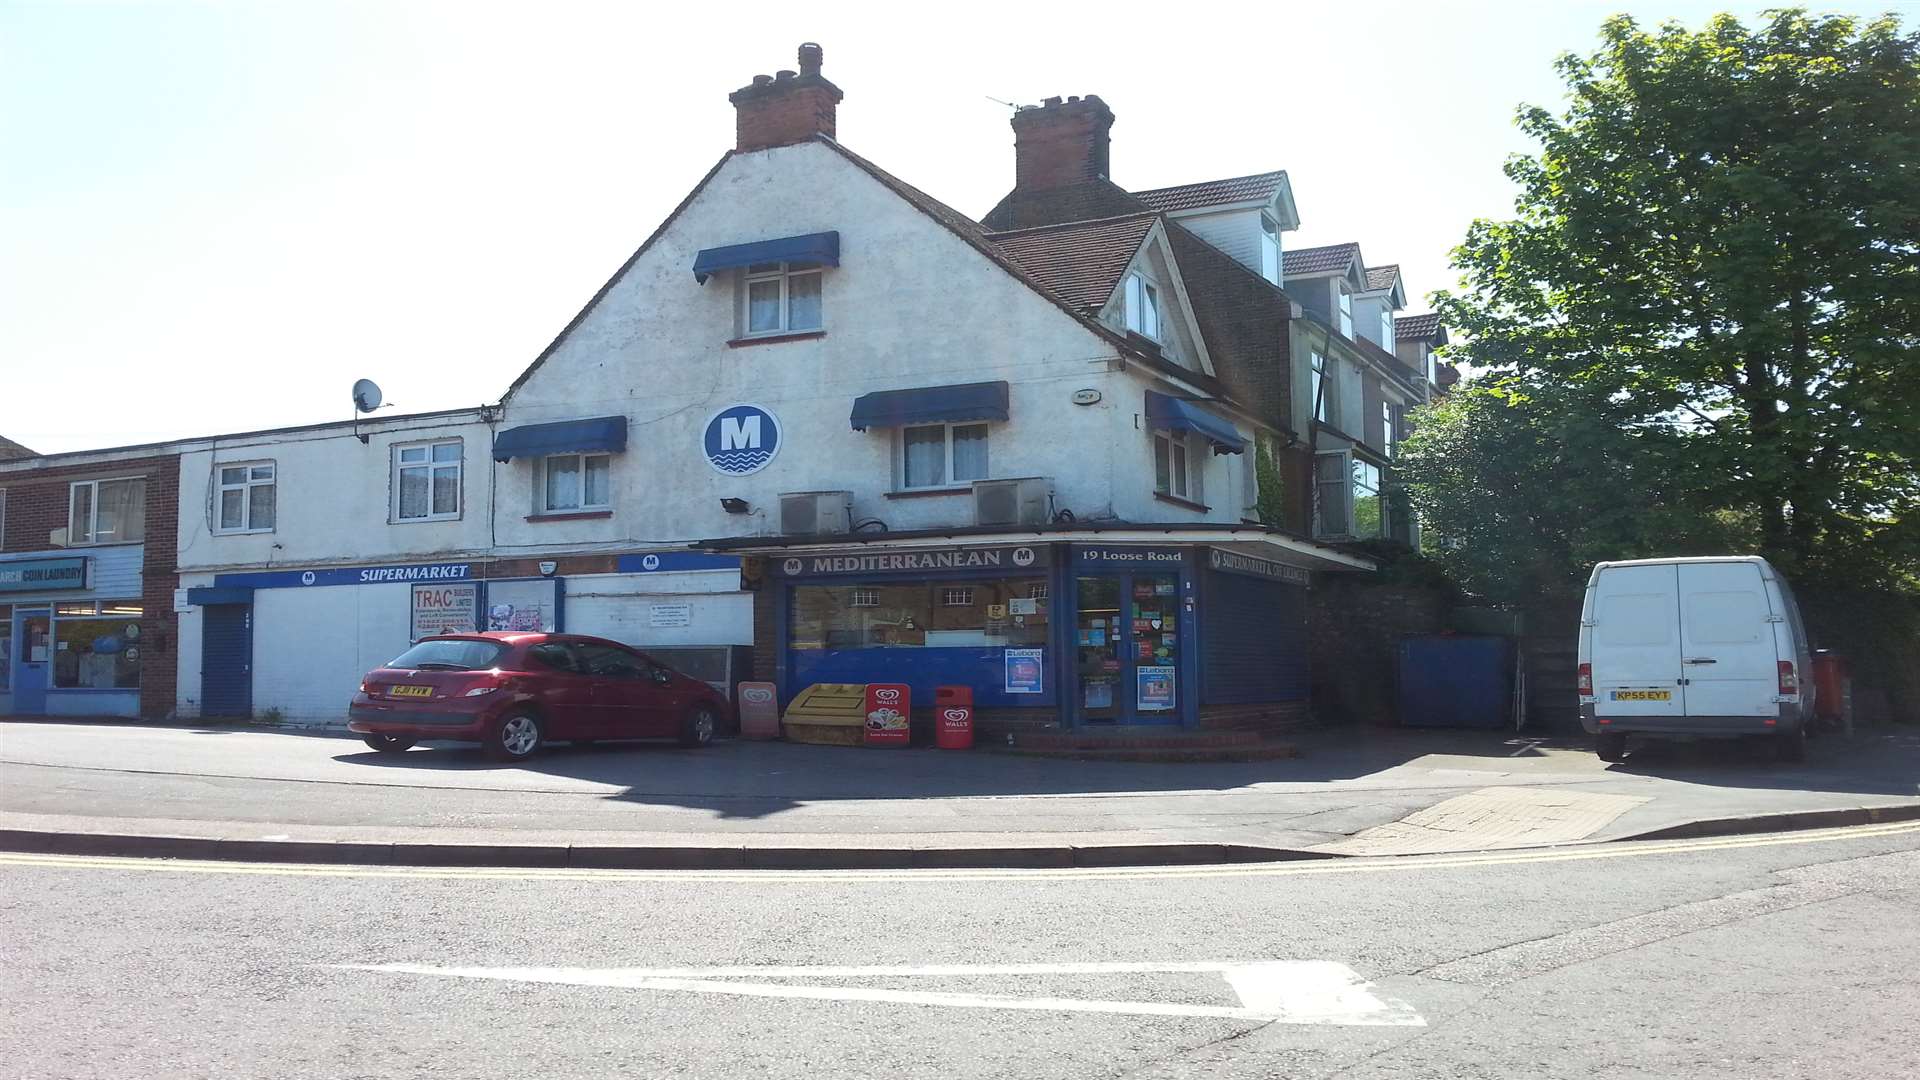 The Mediterranean Shop in Maidstone was robbed